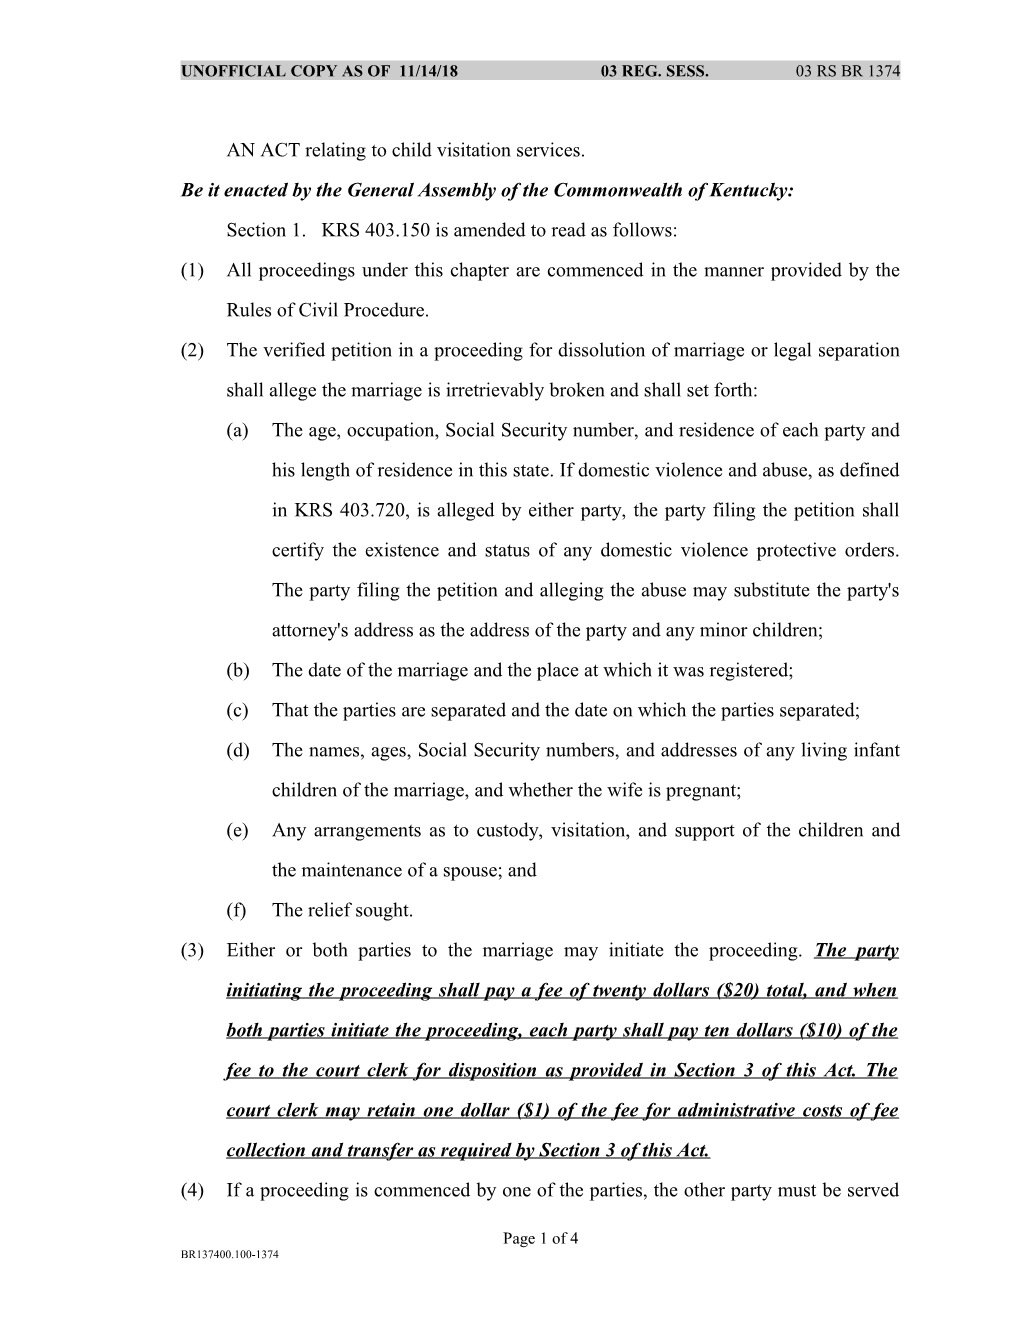 AN ACT Relating to Child Visitation Services